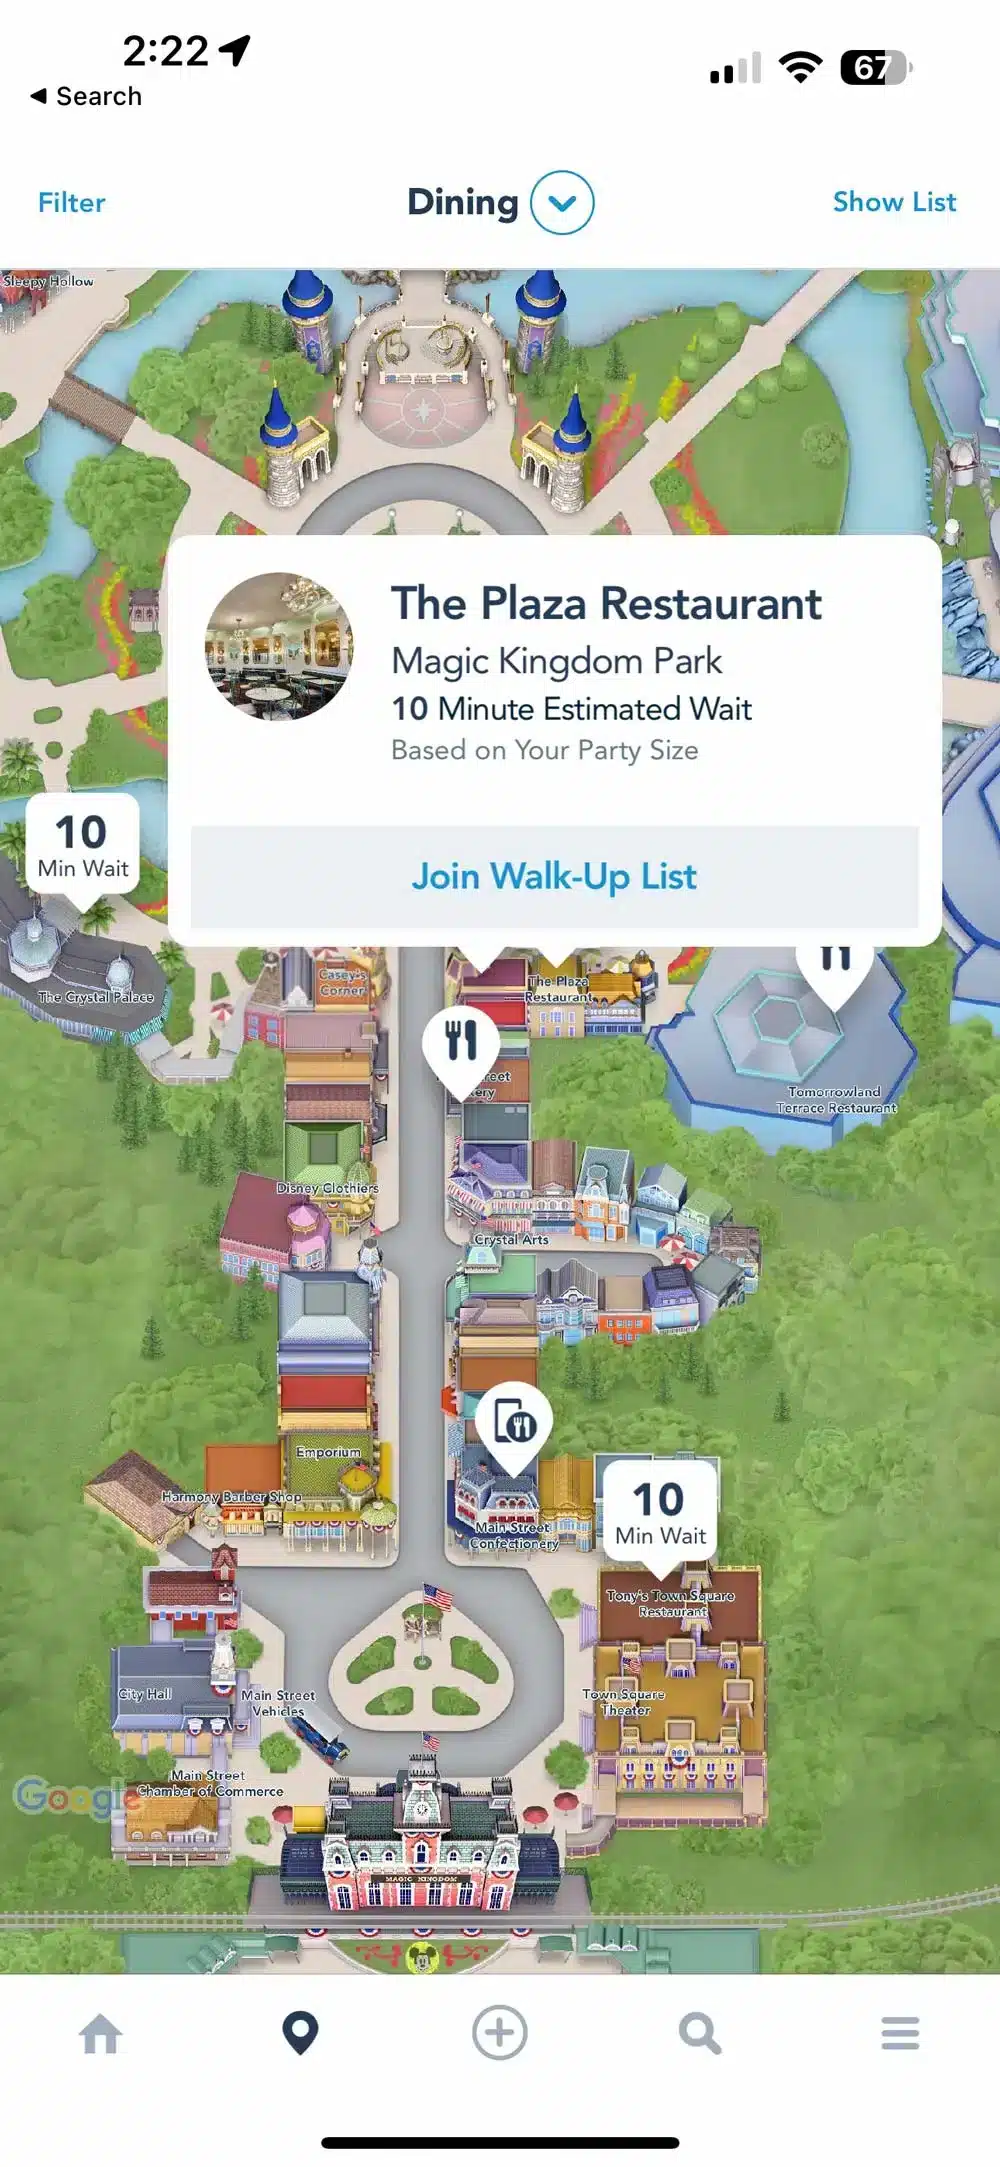 Magic Kingdom Map with Mobile Dine Walk-Up Waitlist Availability Shown